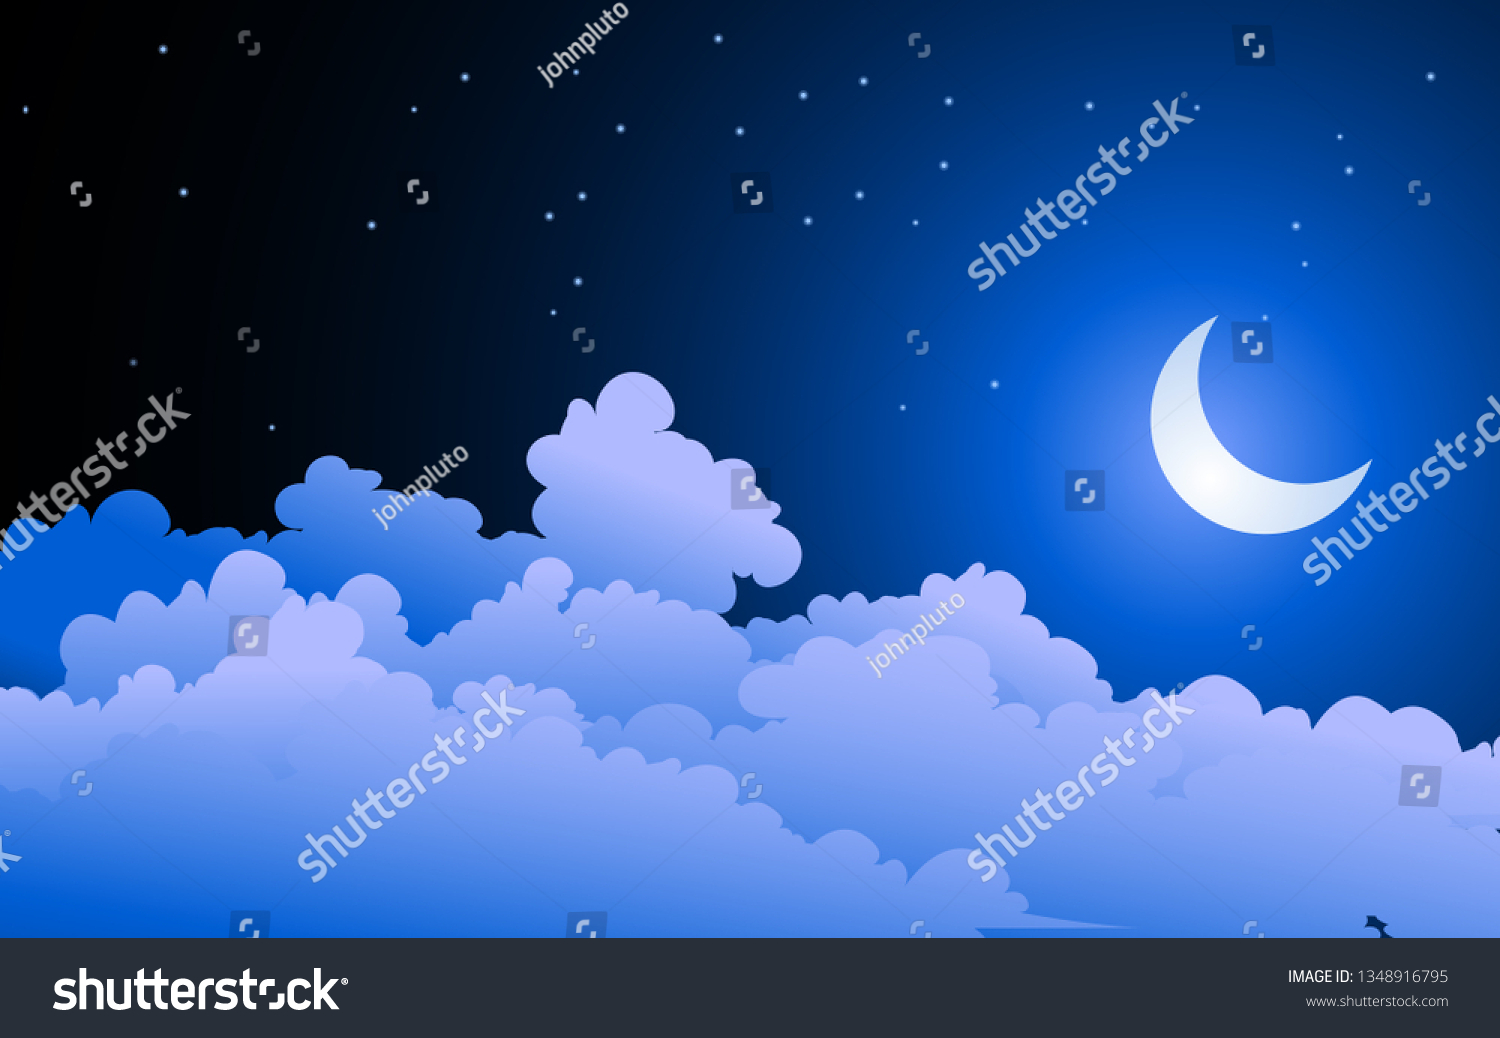 Night Sky Crescent Moon Clouds Stock Vector (Royalty Free) 1348916795 ...